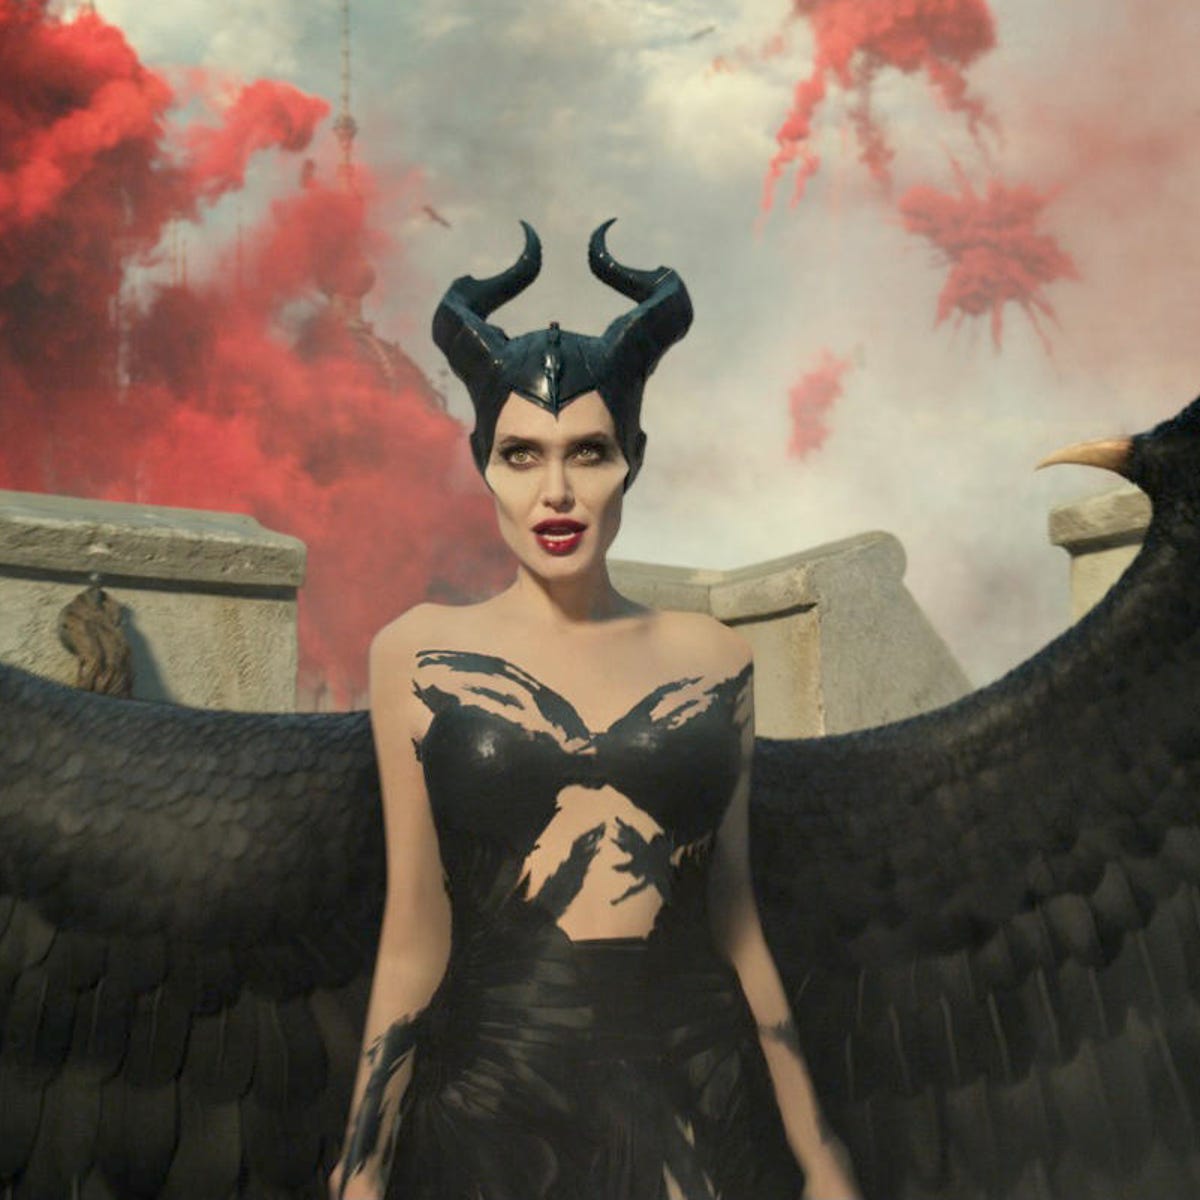 Maleficent: Mistress of Evil crowns Disney as the queen of fantasy ...